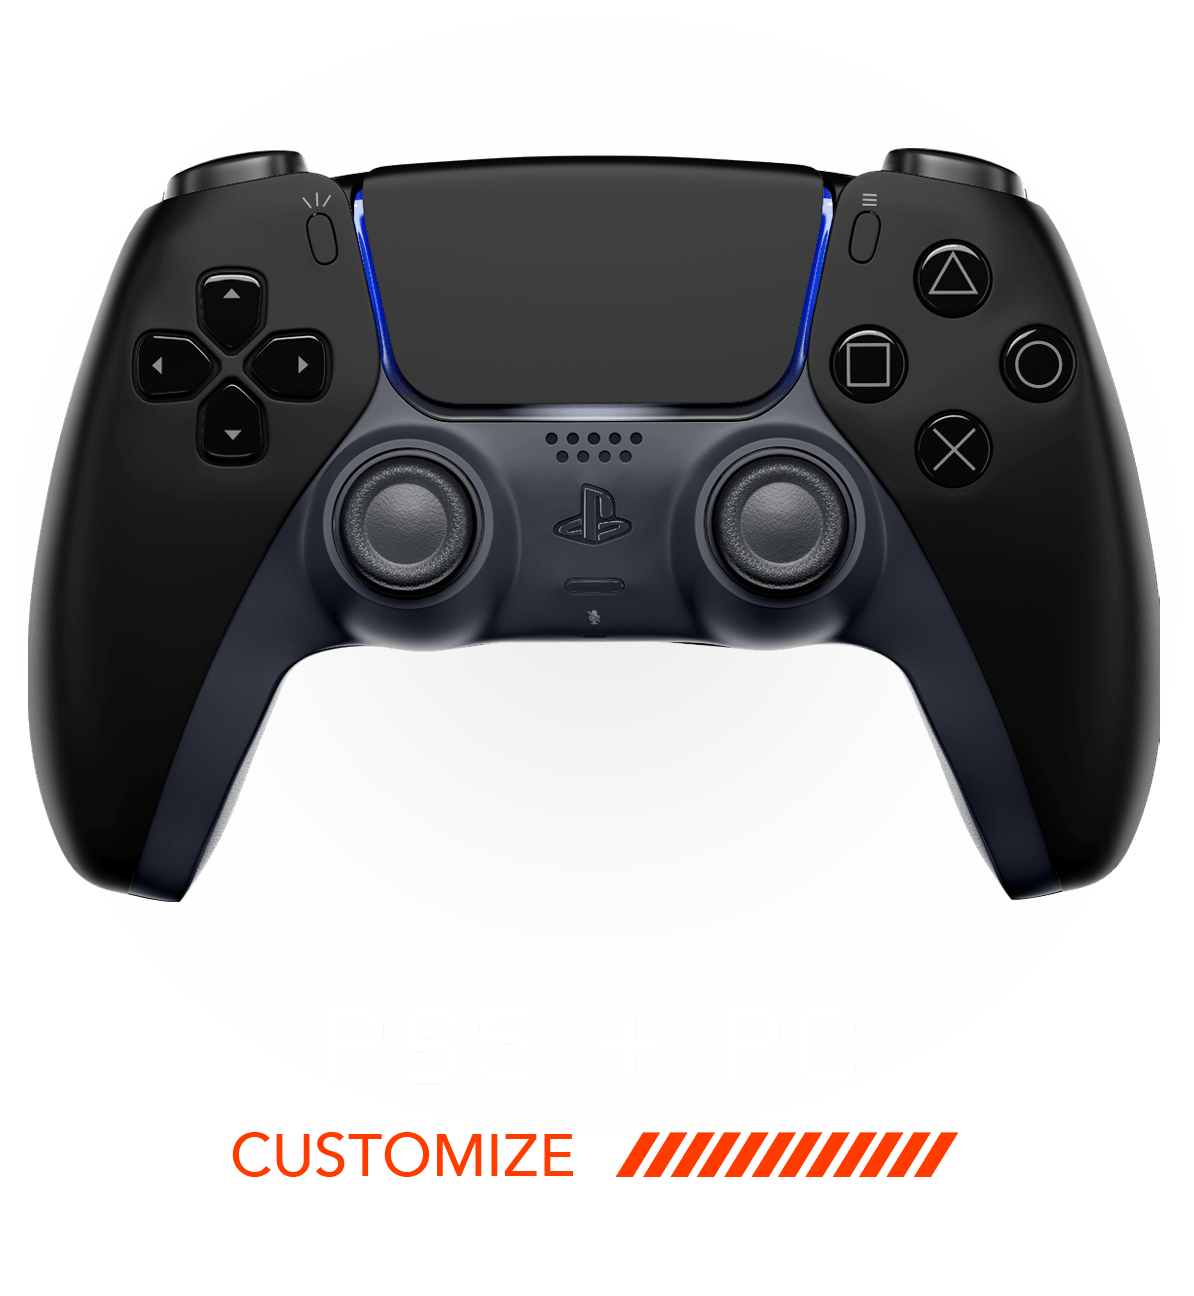 ModdedZone - Custom Modded Controllers for Xbox One and PS5